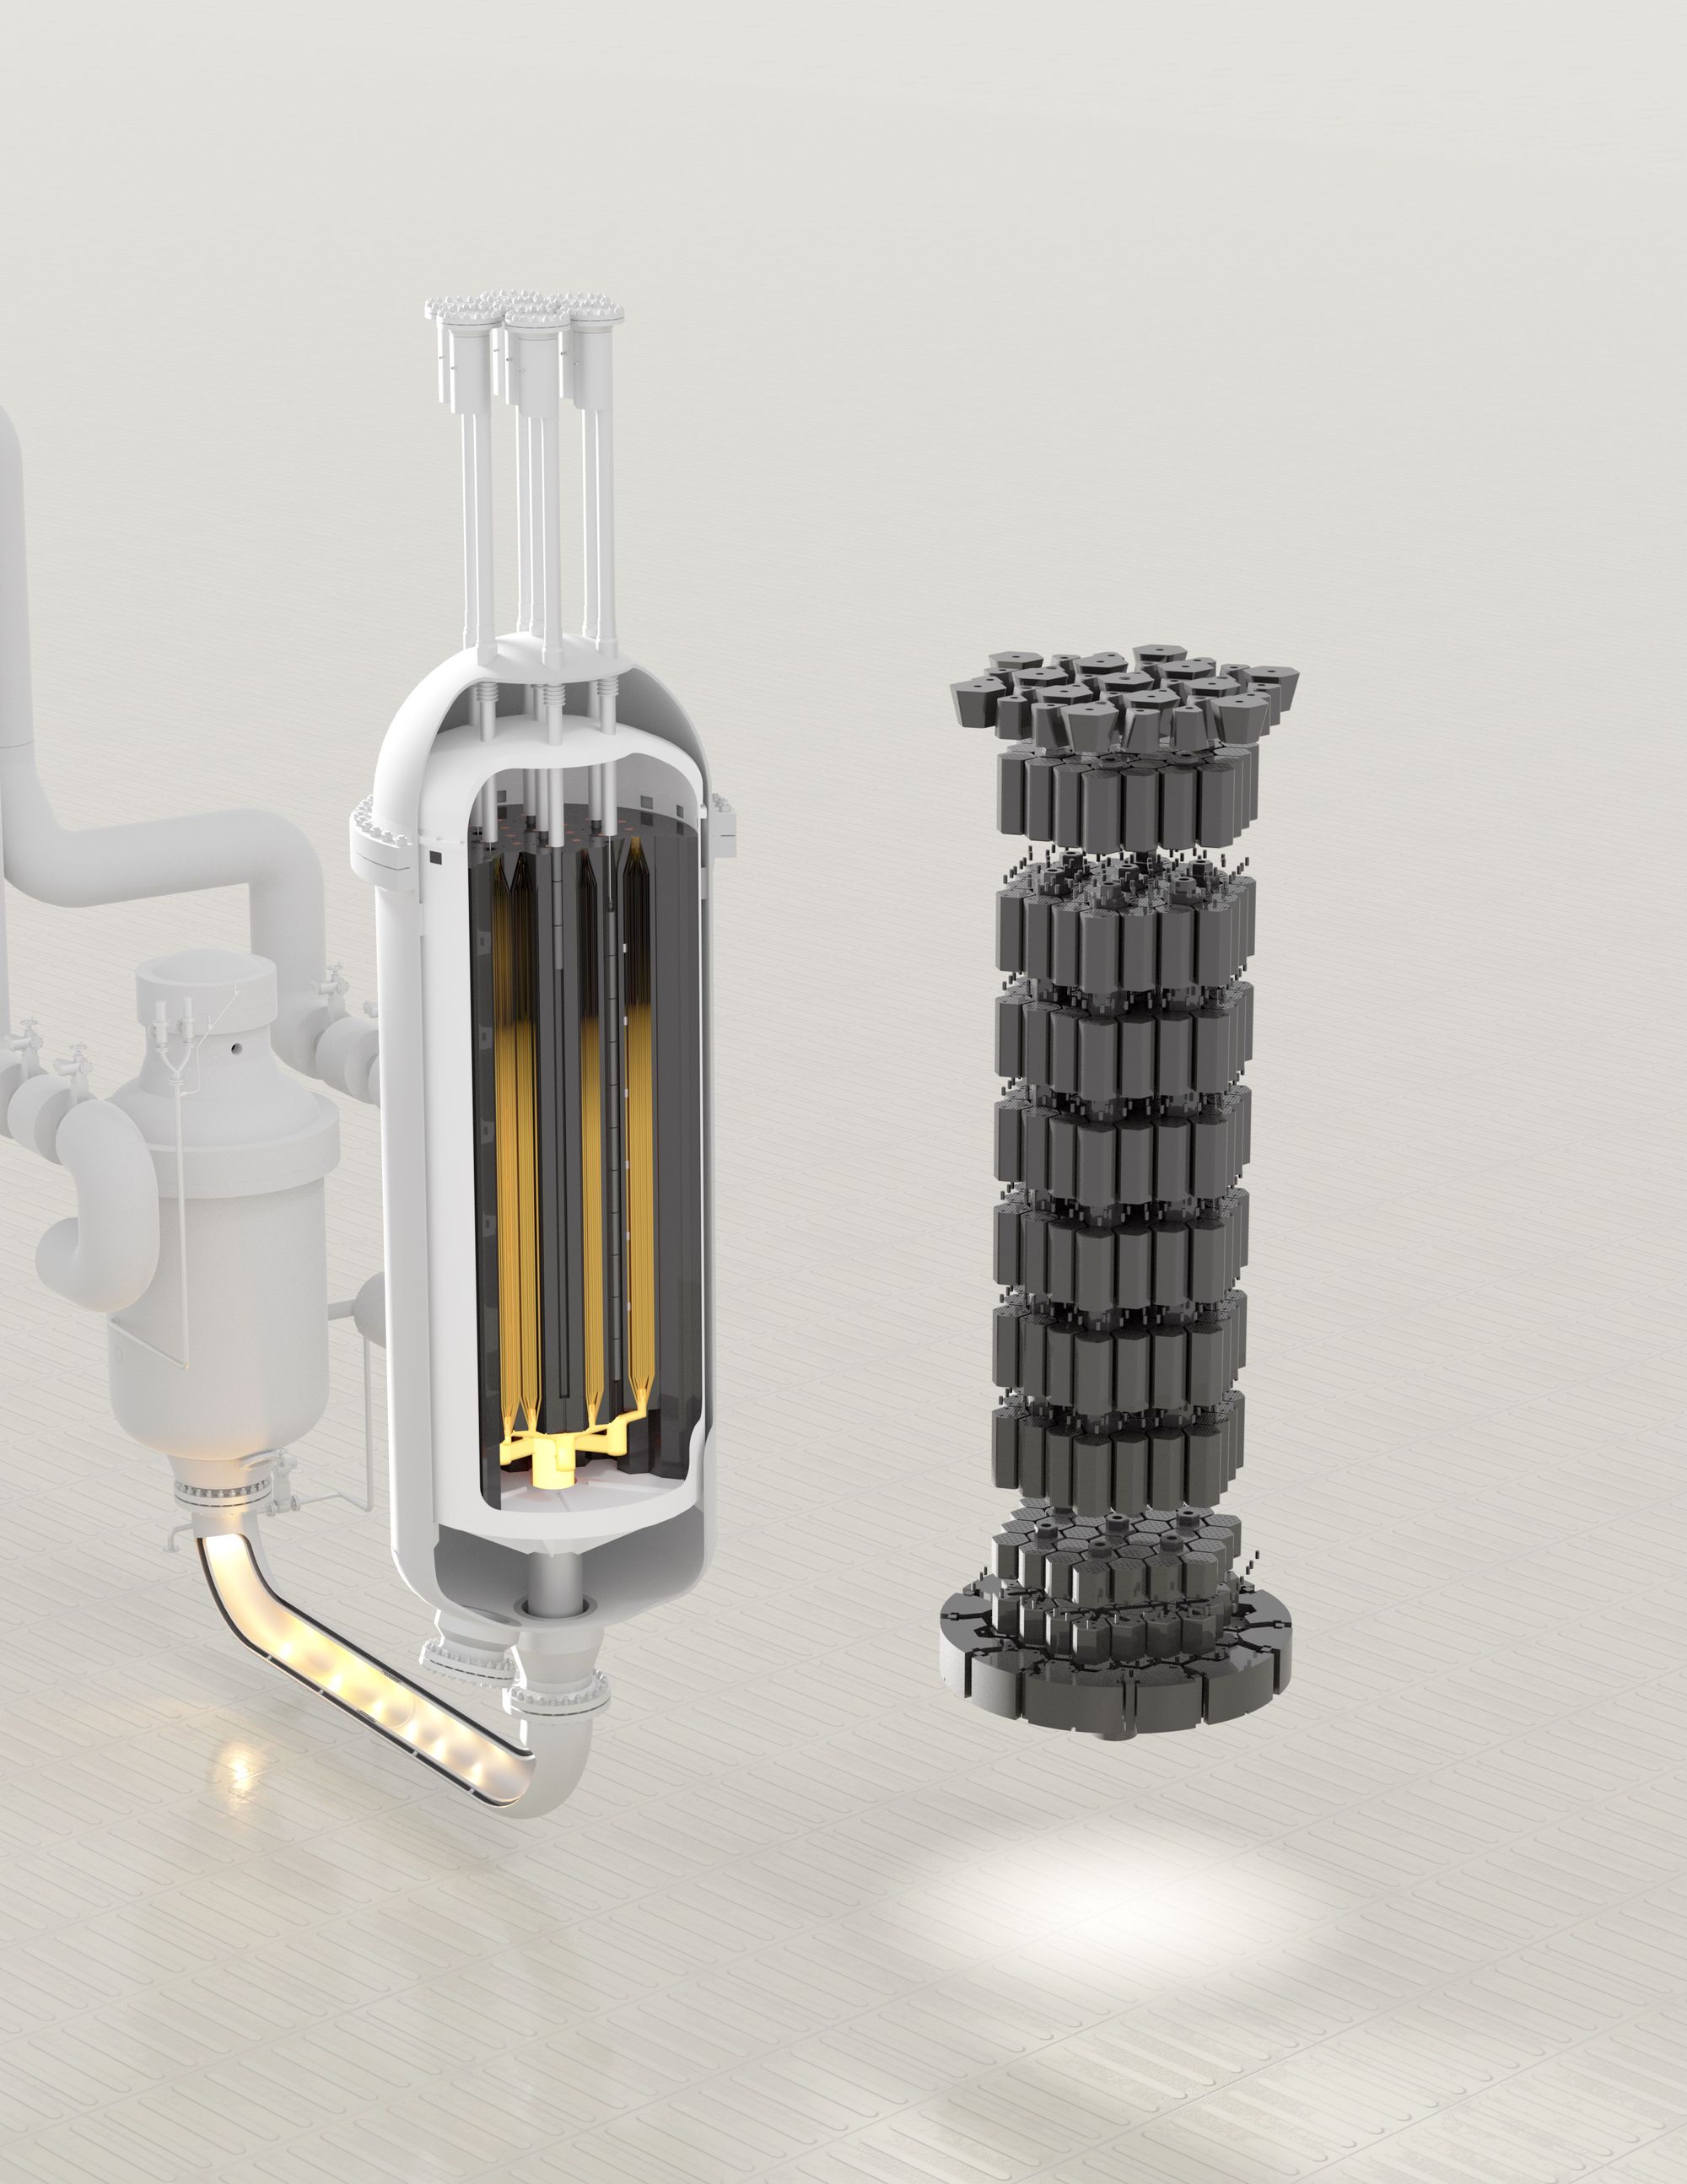 Ultra Safe Nuclear Corp. Micro Modular Reactor 
Achieves Canadian Licensing Milestone